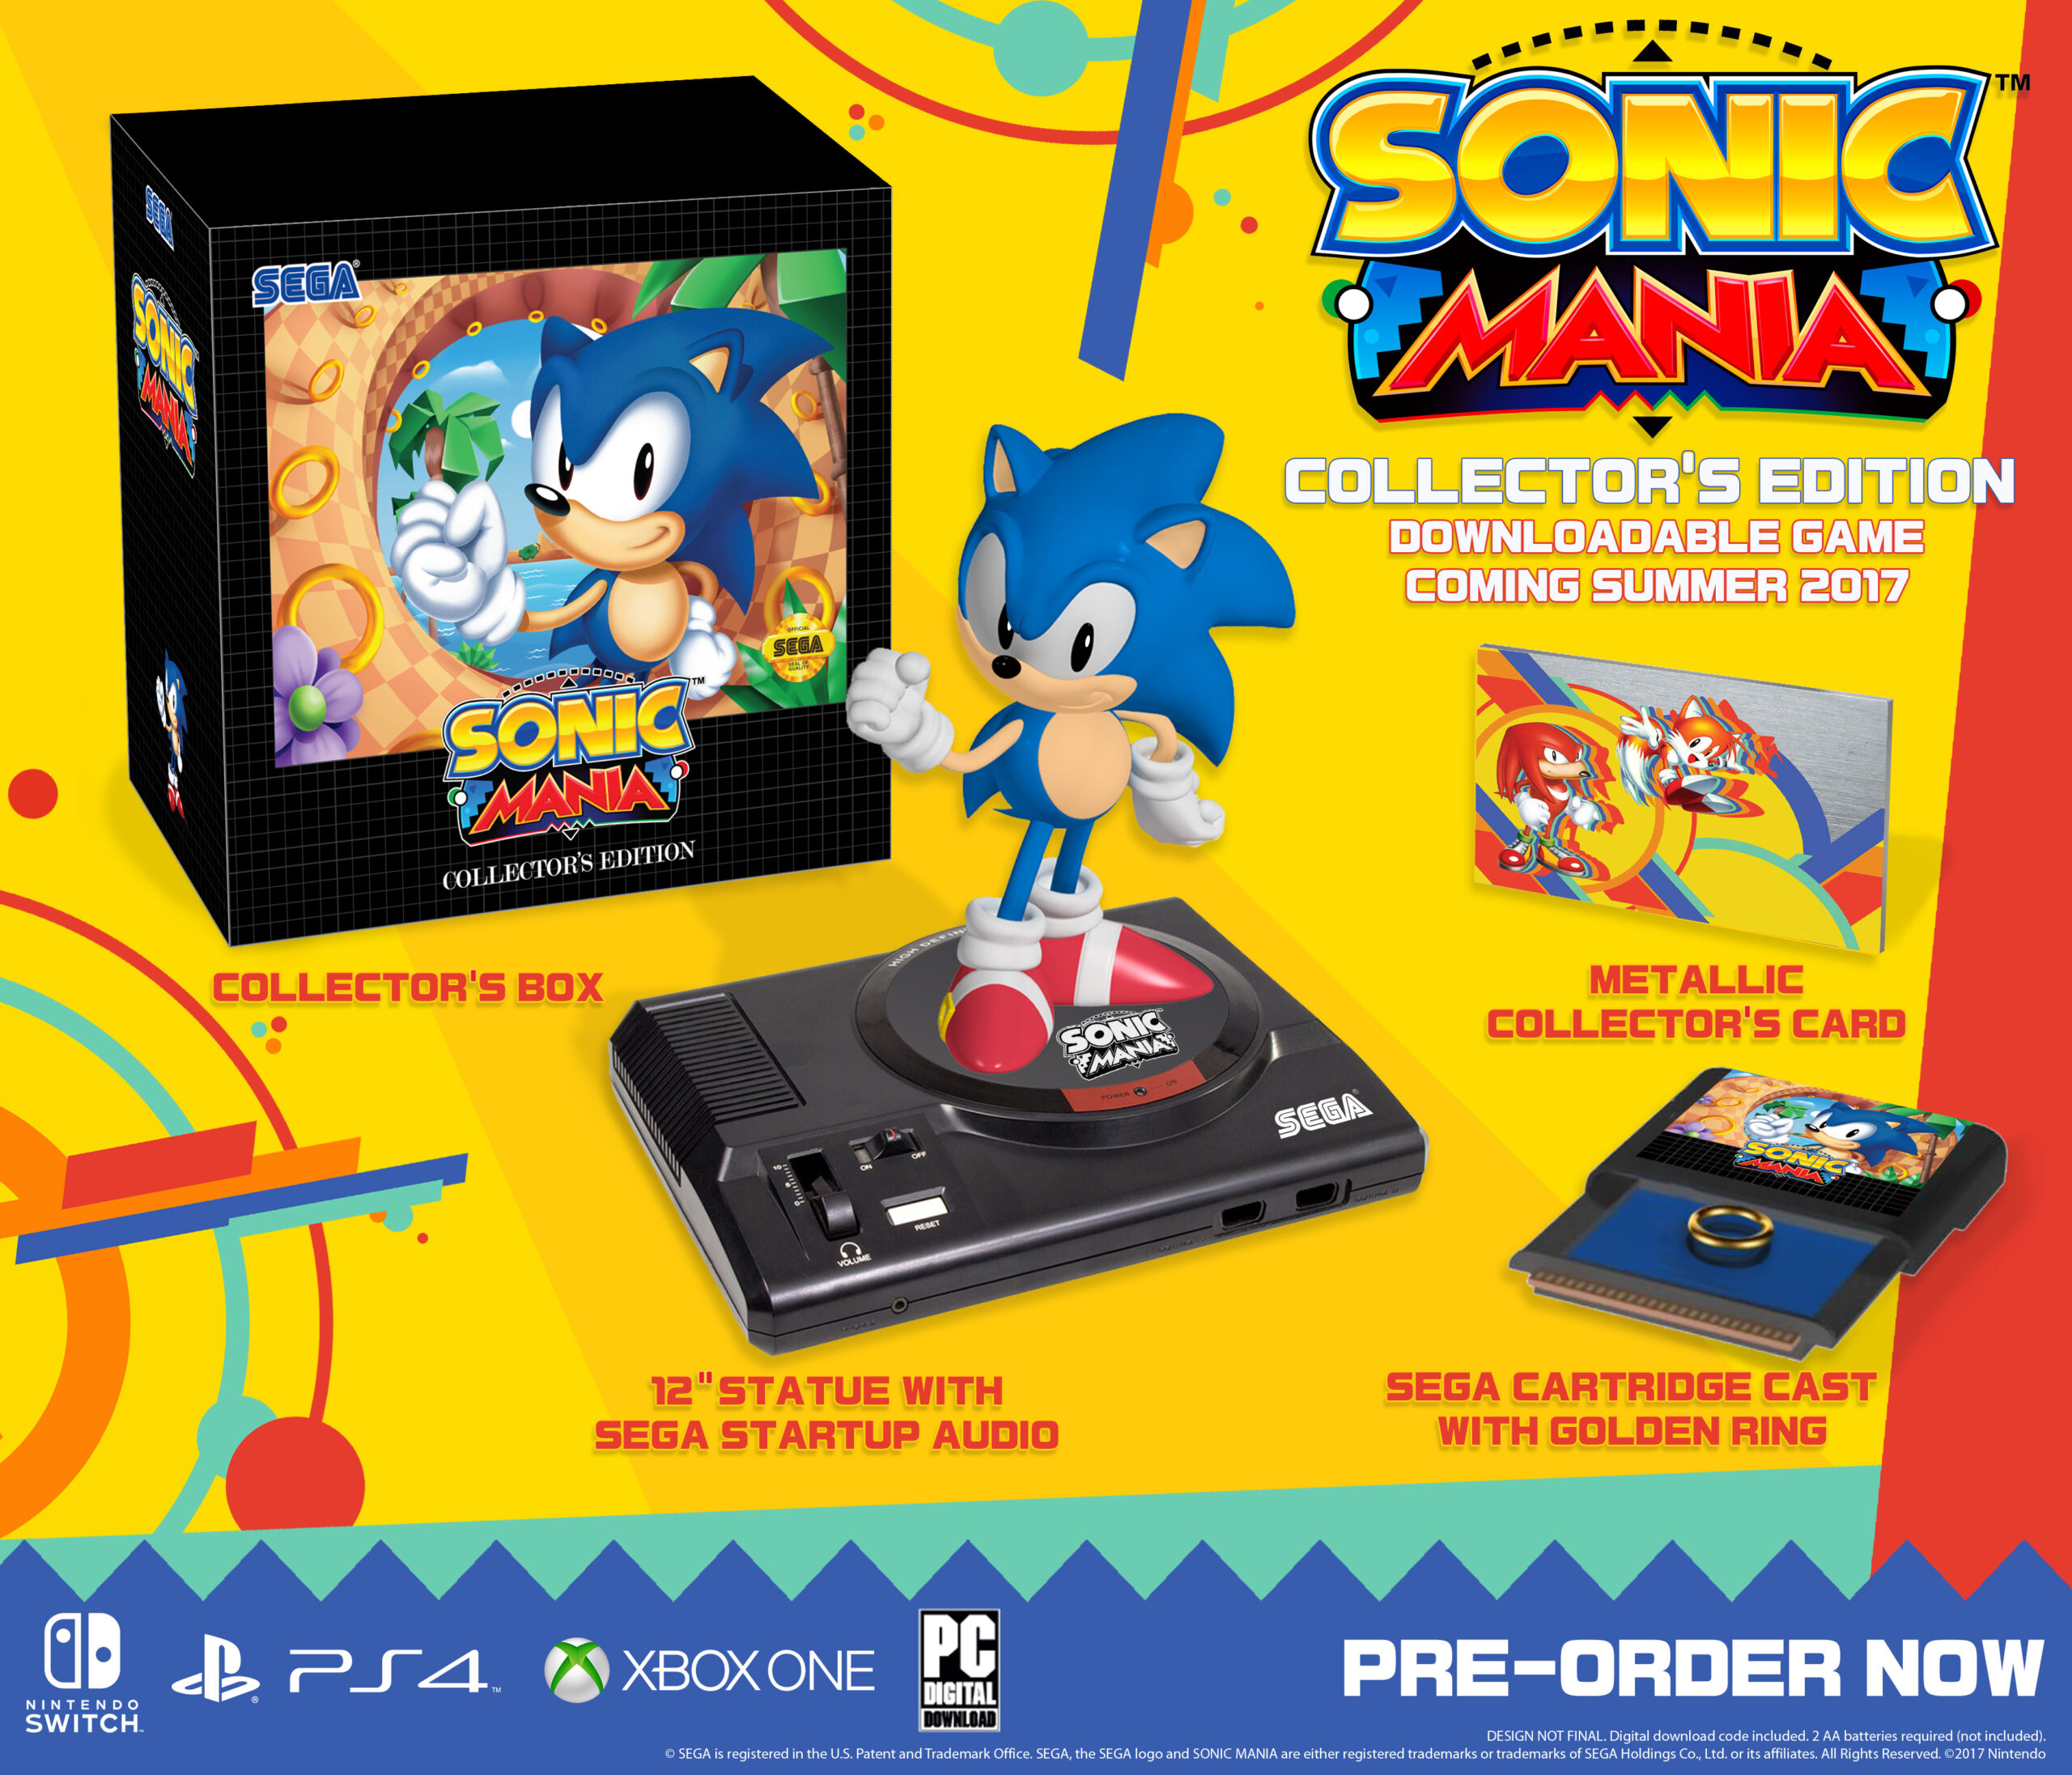 Sonic Mania PC version launches with Denuvo, online requirement